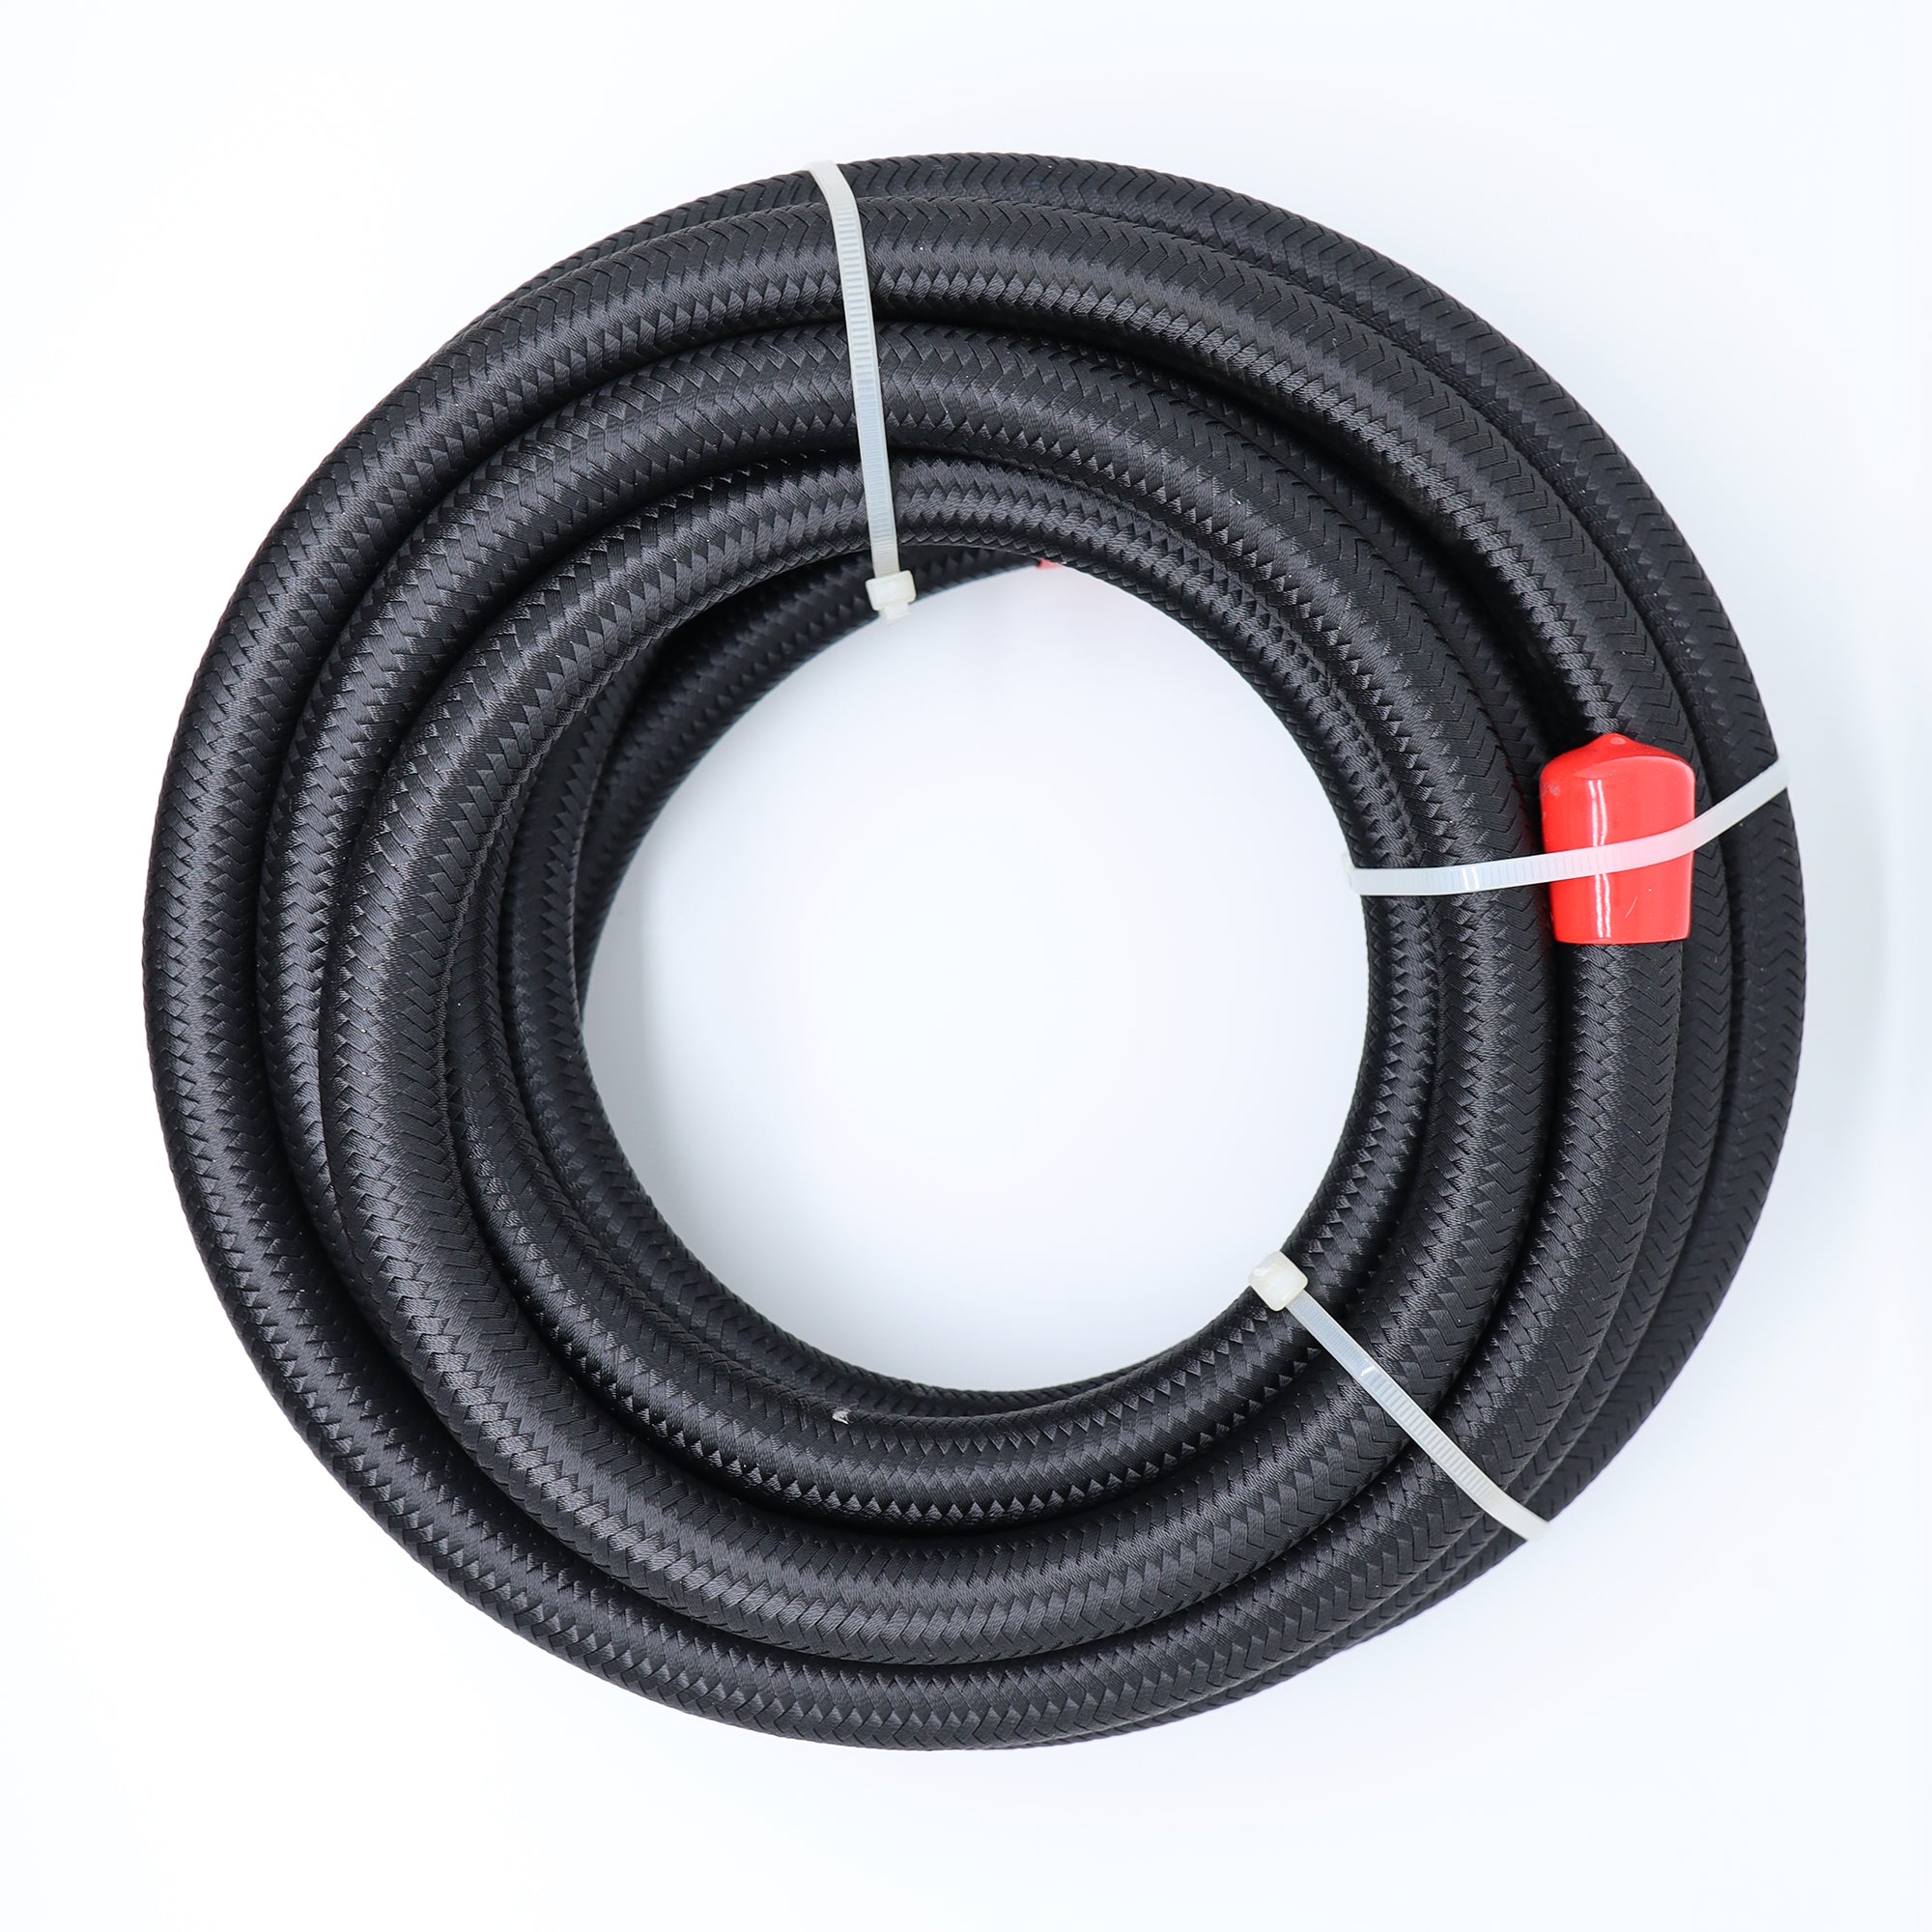 20FT 6AN Fuel Line Hose AN6 3/8 Nylon Stainless Steel Braided